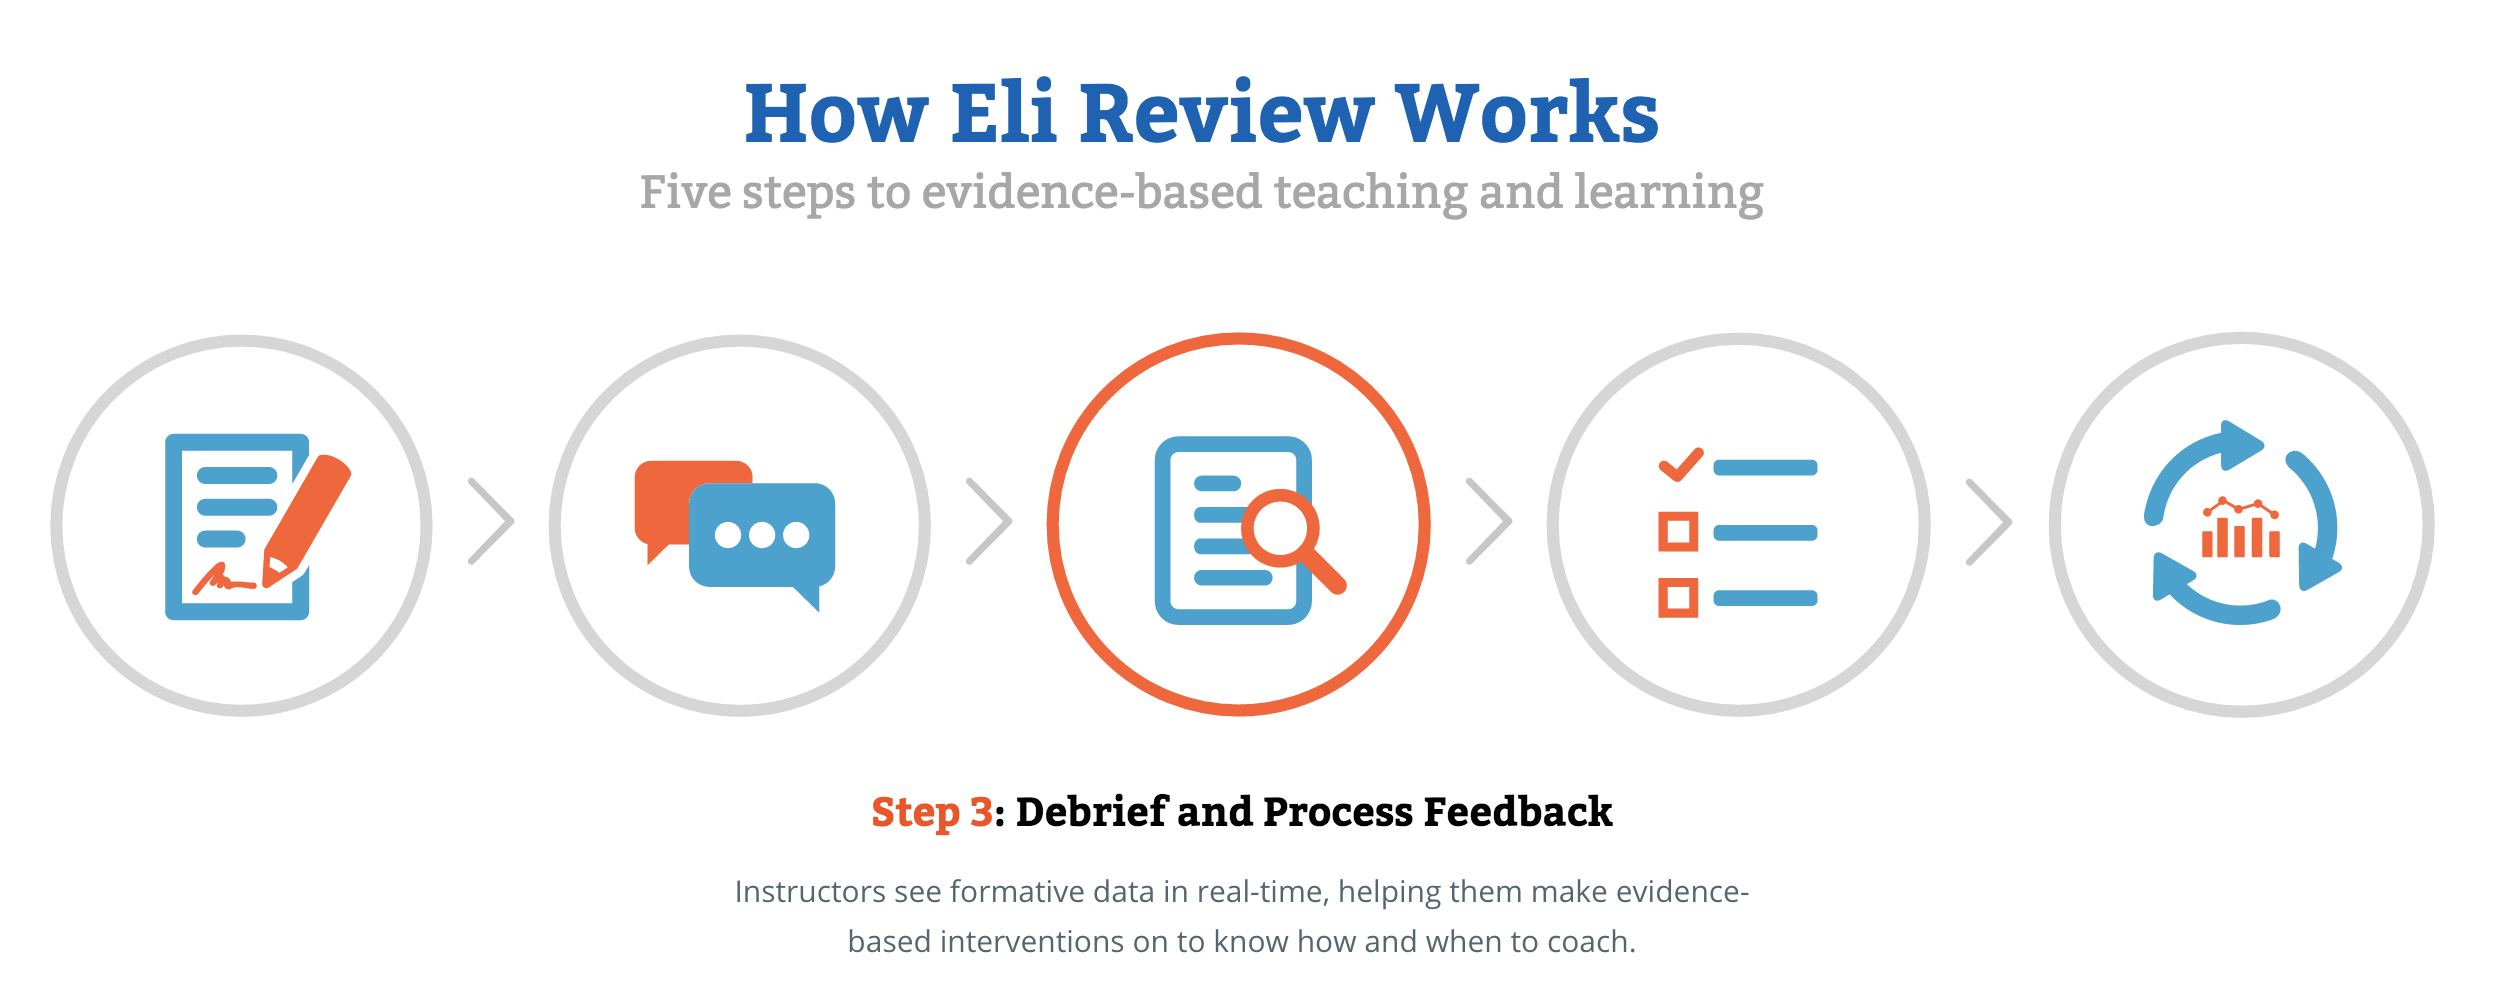 A screen shot from the Eli Review homepage. The image shows 5 orange and blue circles, each with an icon representing one of 5 steps within the Eli Review process. The third step, "Debrief and Process Feedback," is highlighted.